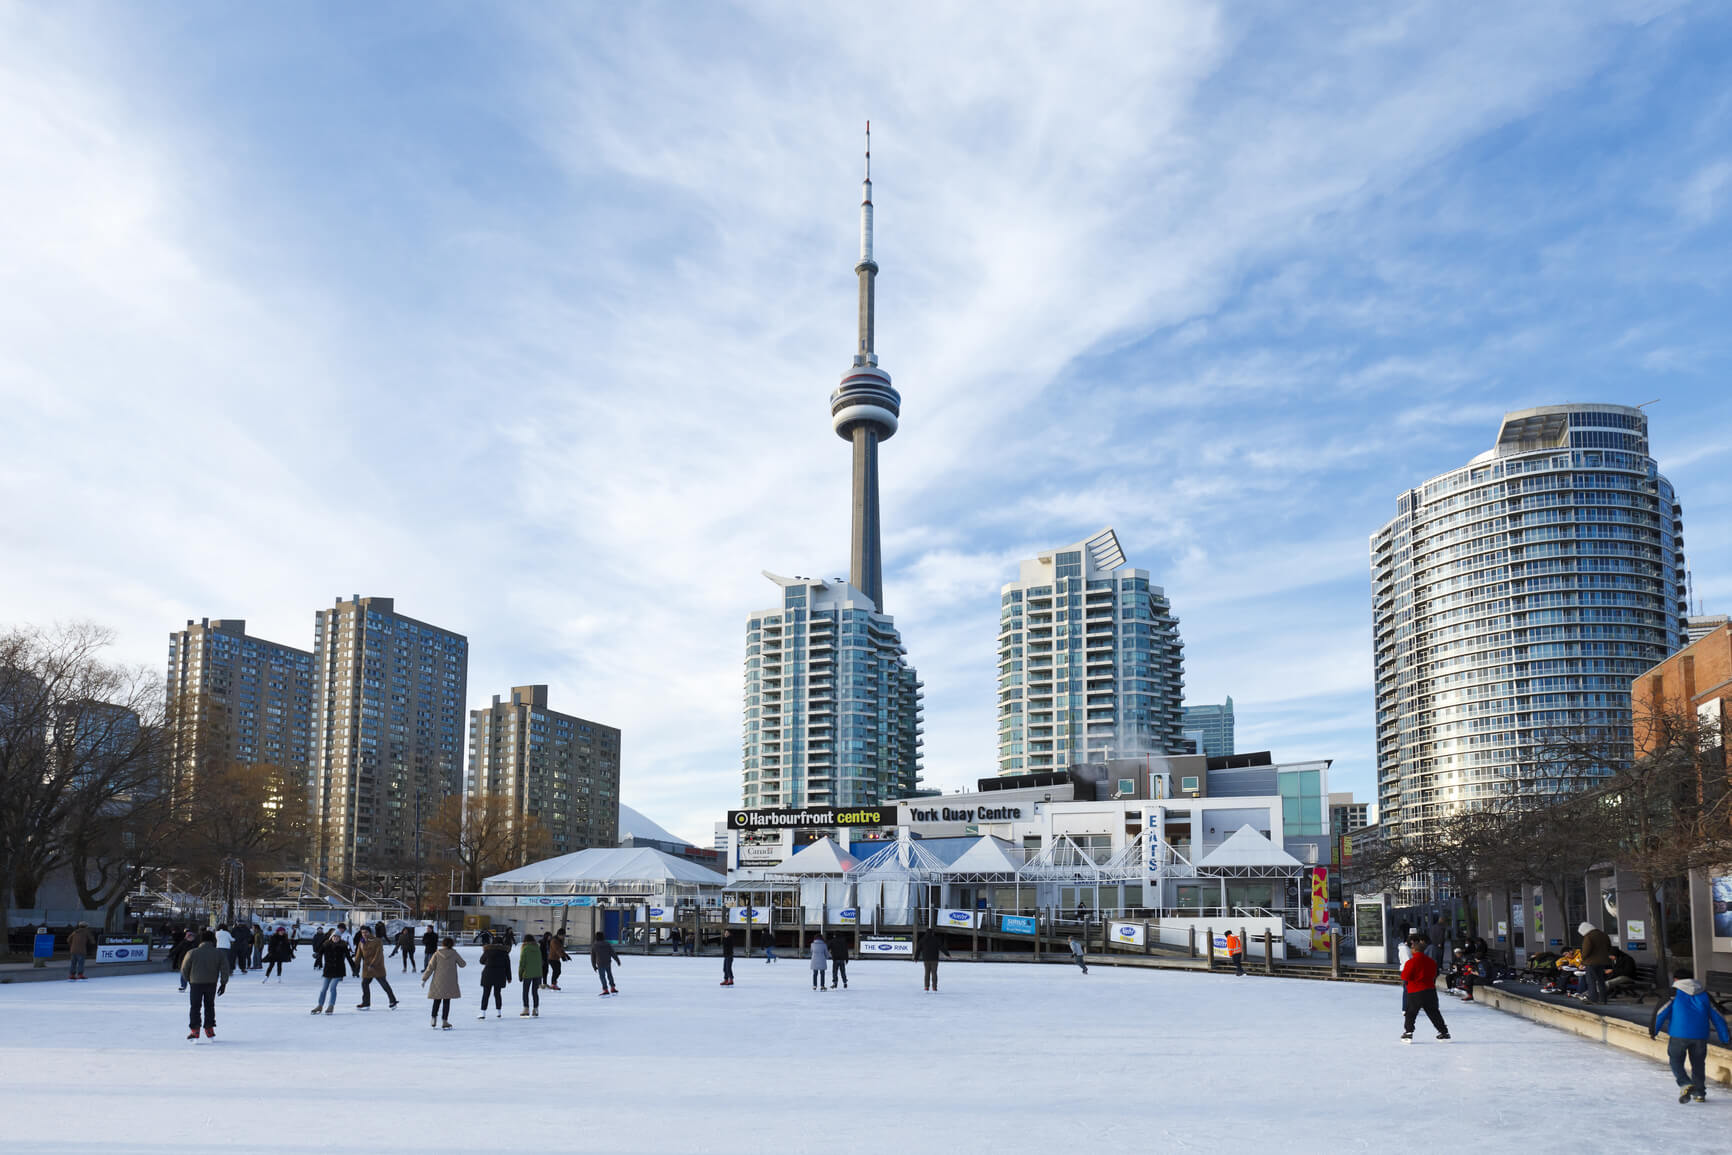 SUMMER: Vienna, Austria to Toronto, Canada for only €269 roundtrip (Jul-Oct dates)